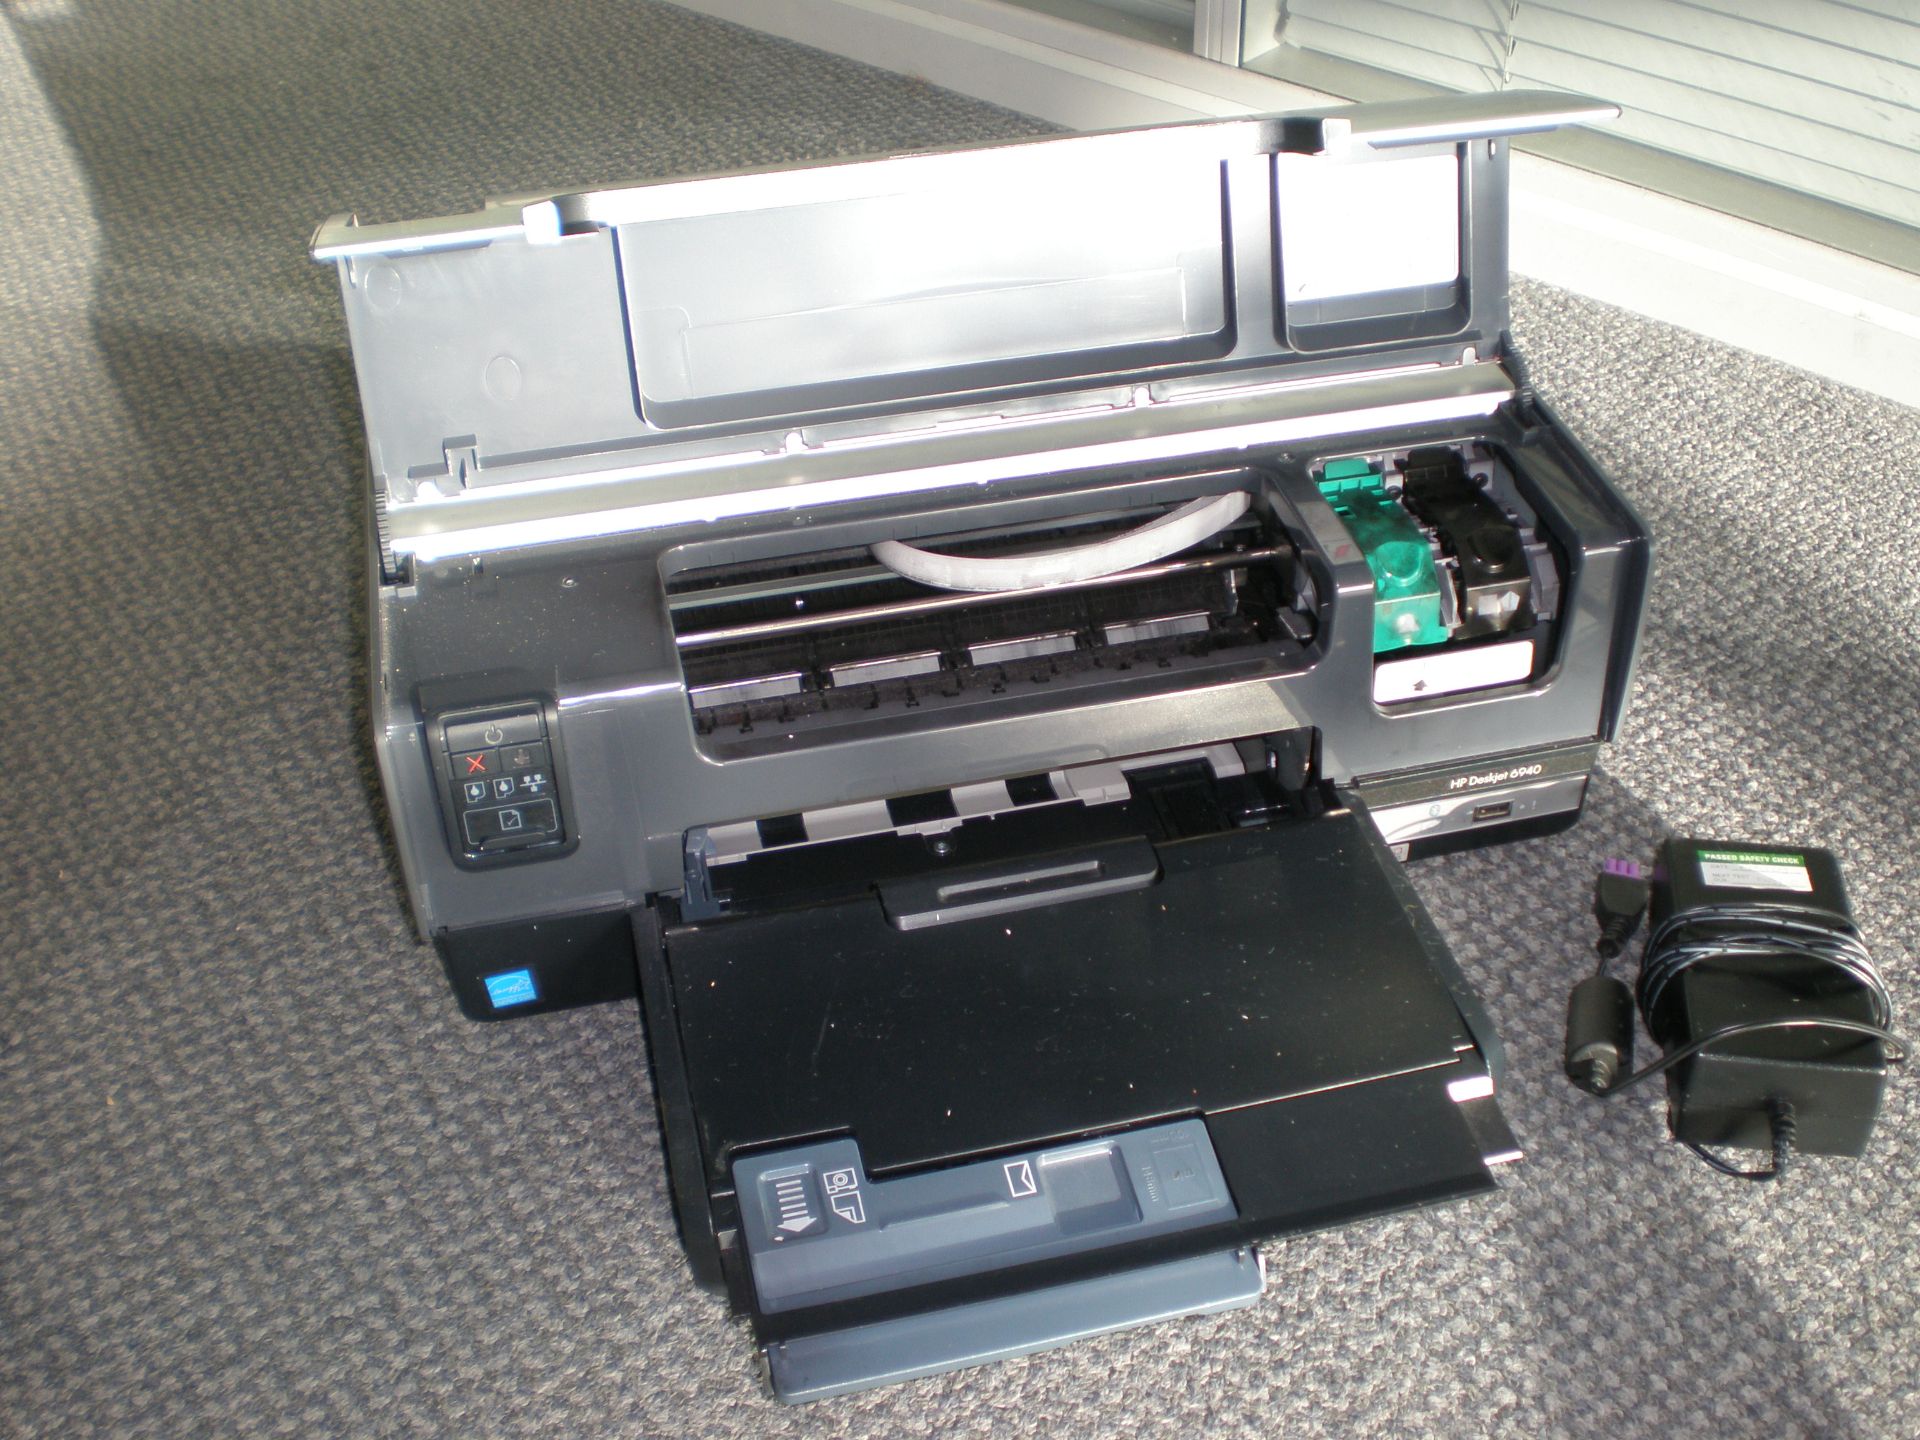 Hp Deskjet 6940 Printer With Power Supply Print On Network Or Direct Via A Usb Cable Input - Image 2 of 3